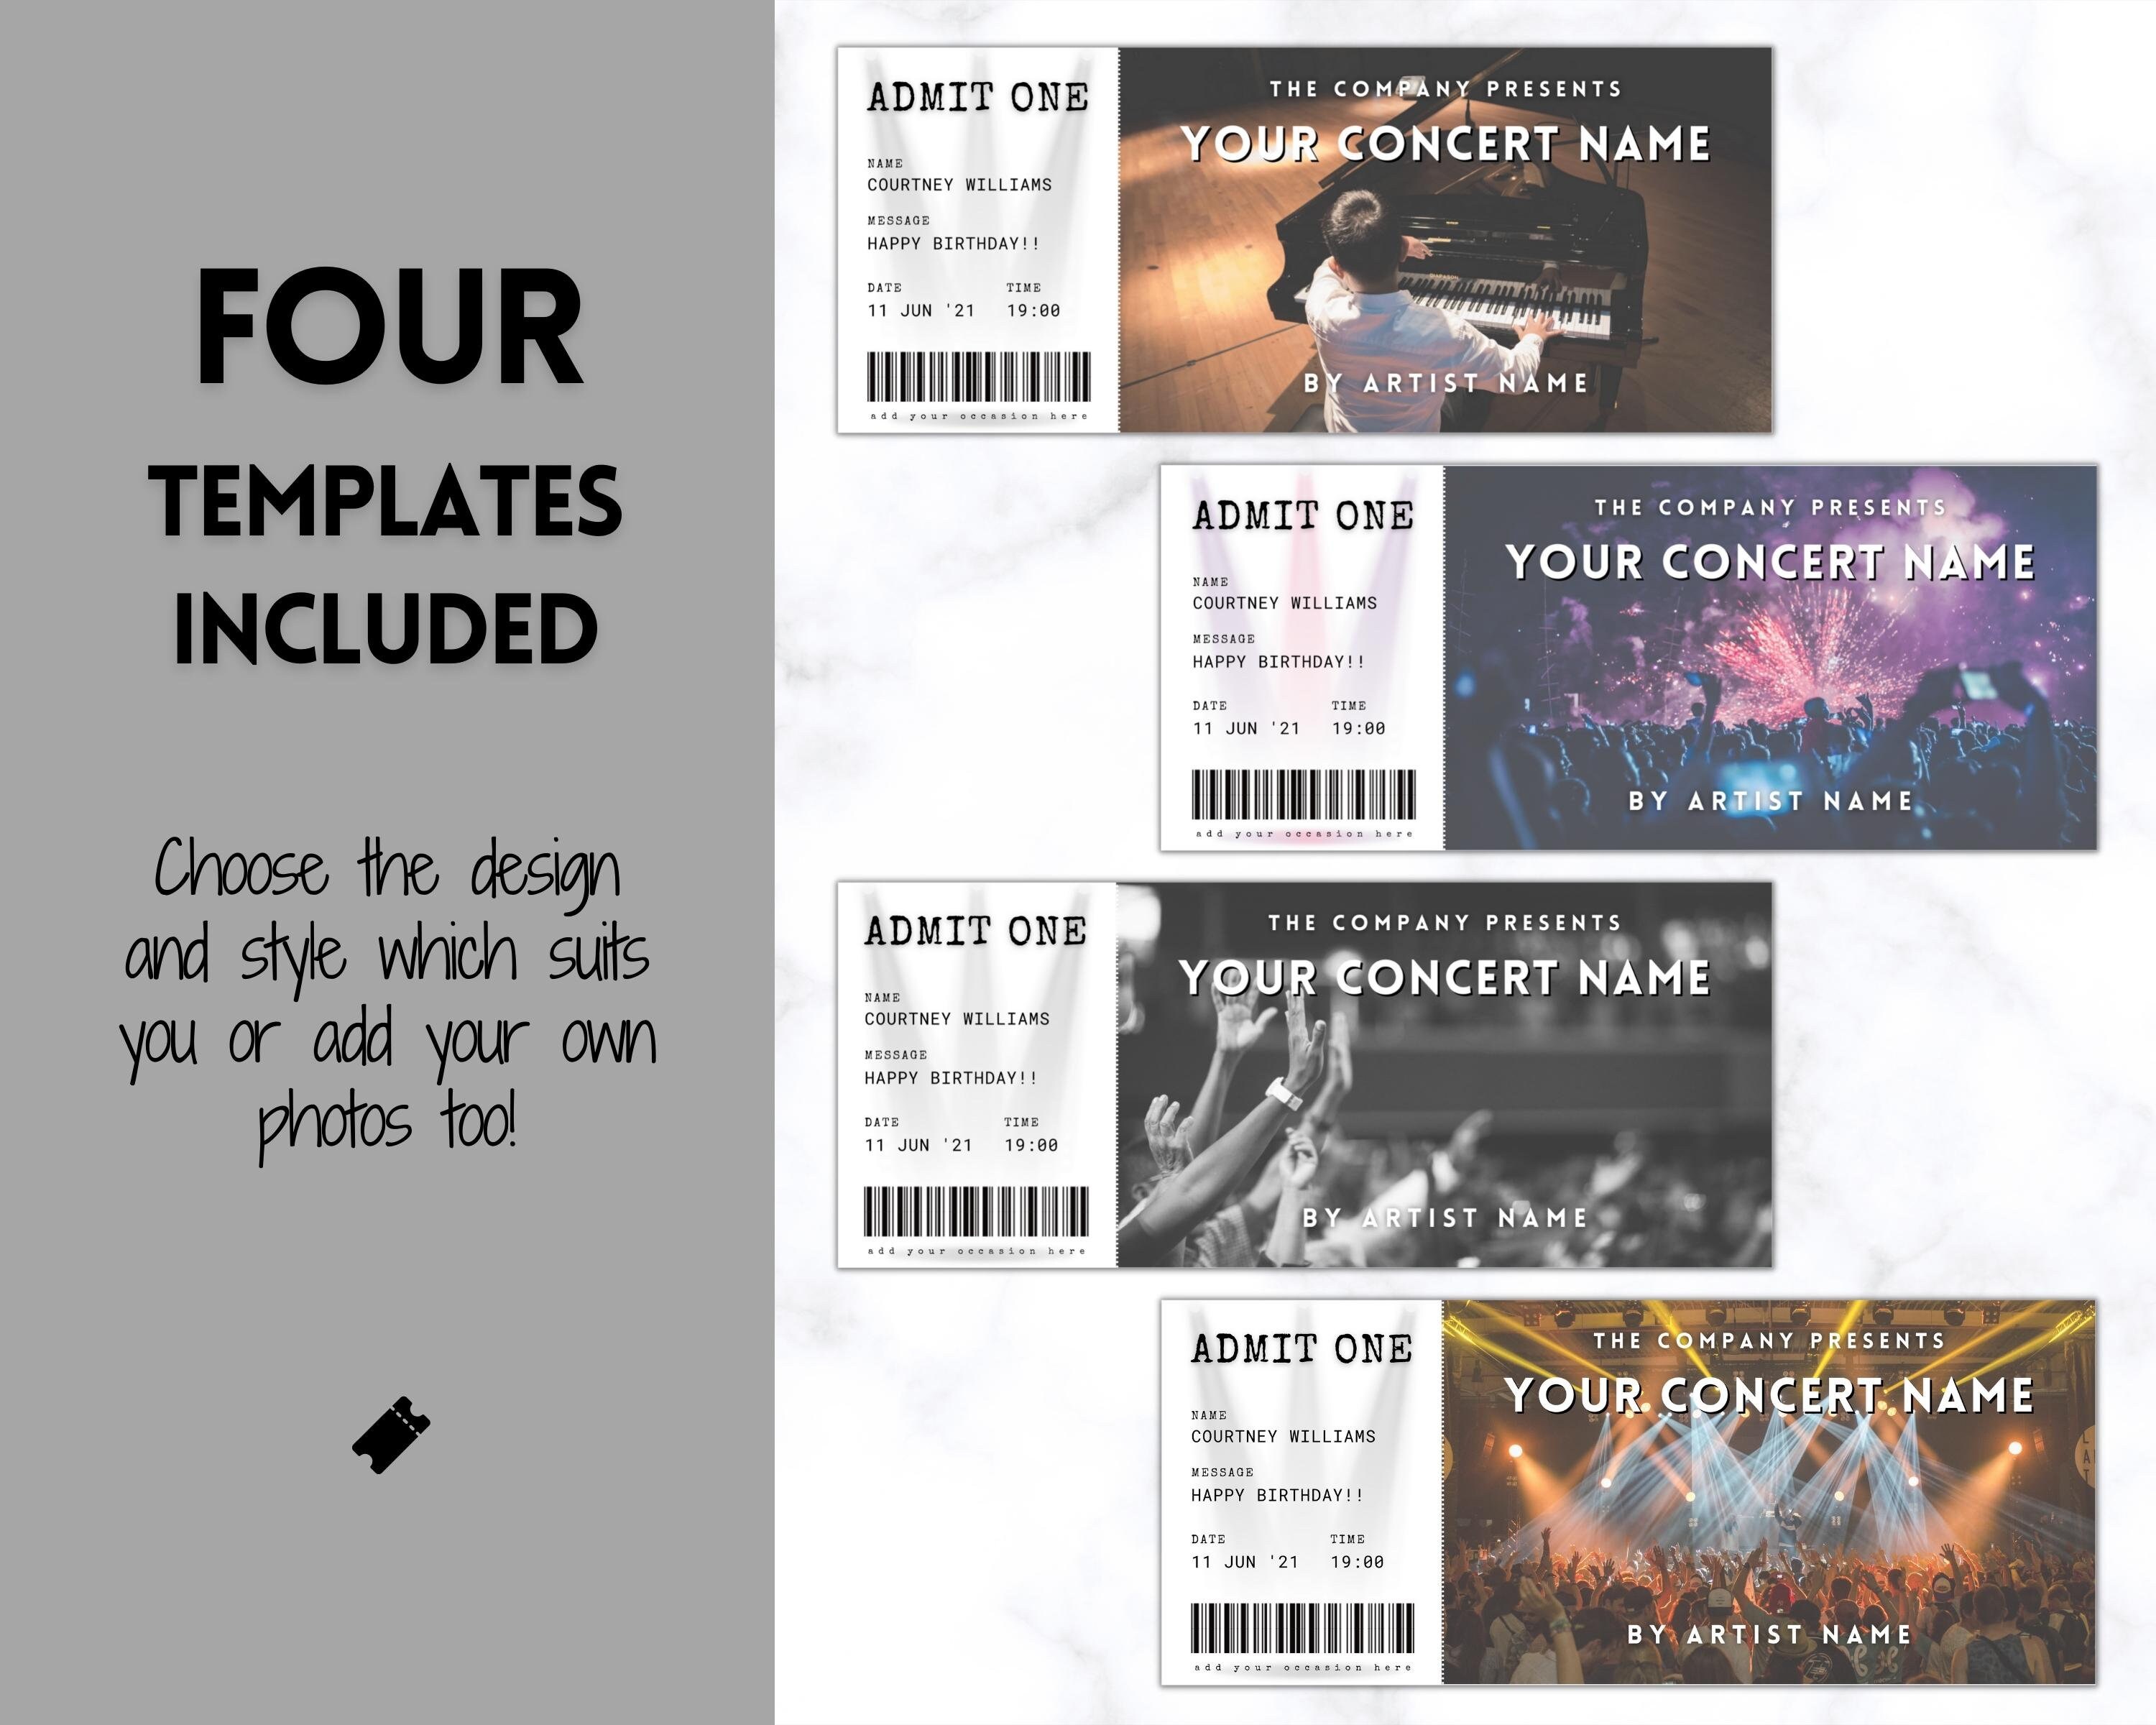 Event Ticket Editable Template  Perfect Gift for Special Occasions